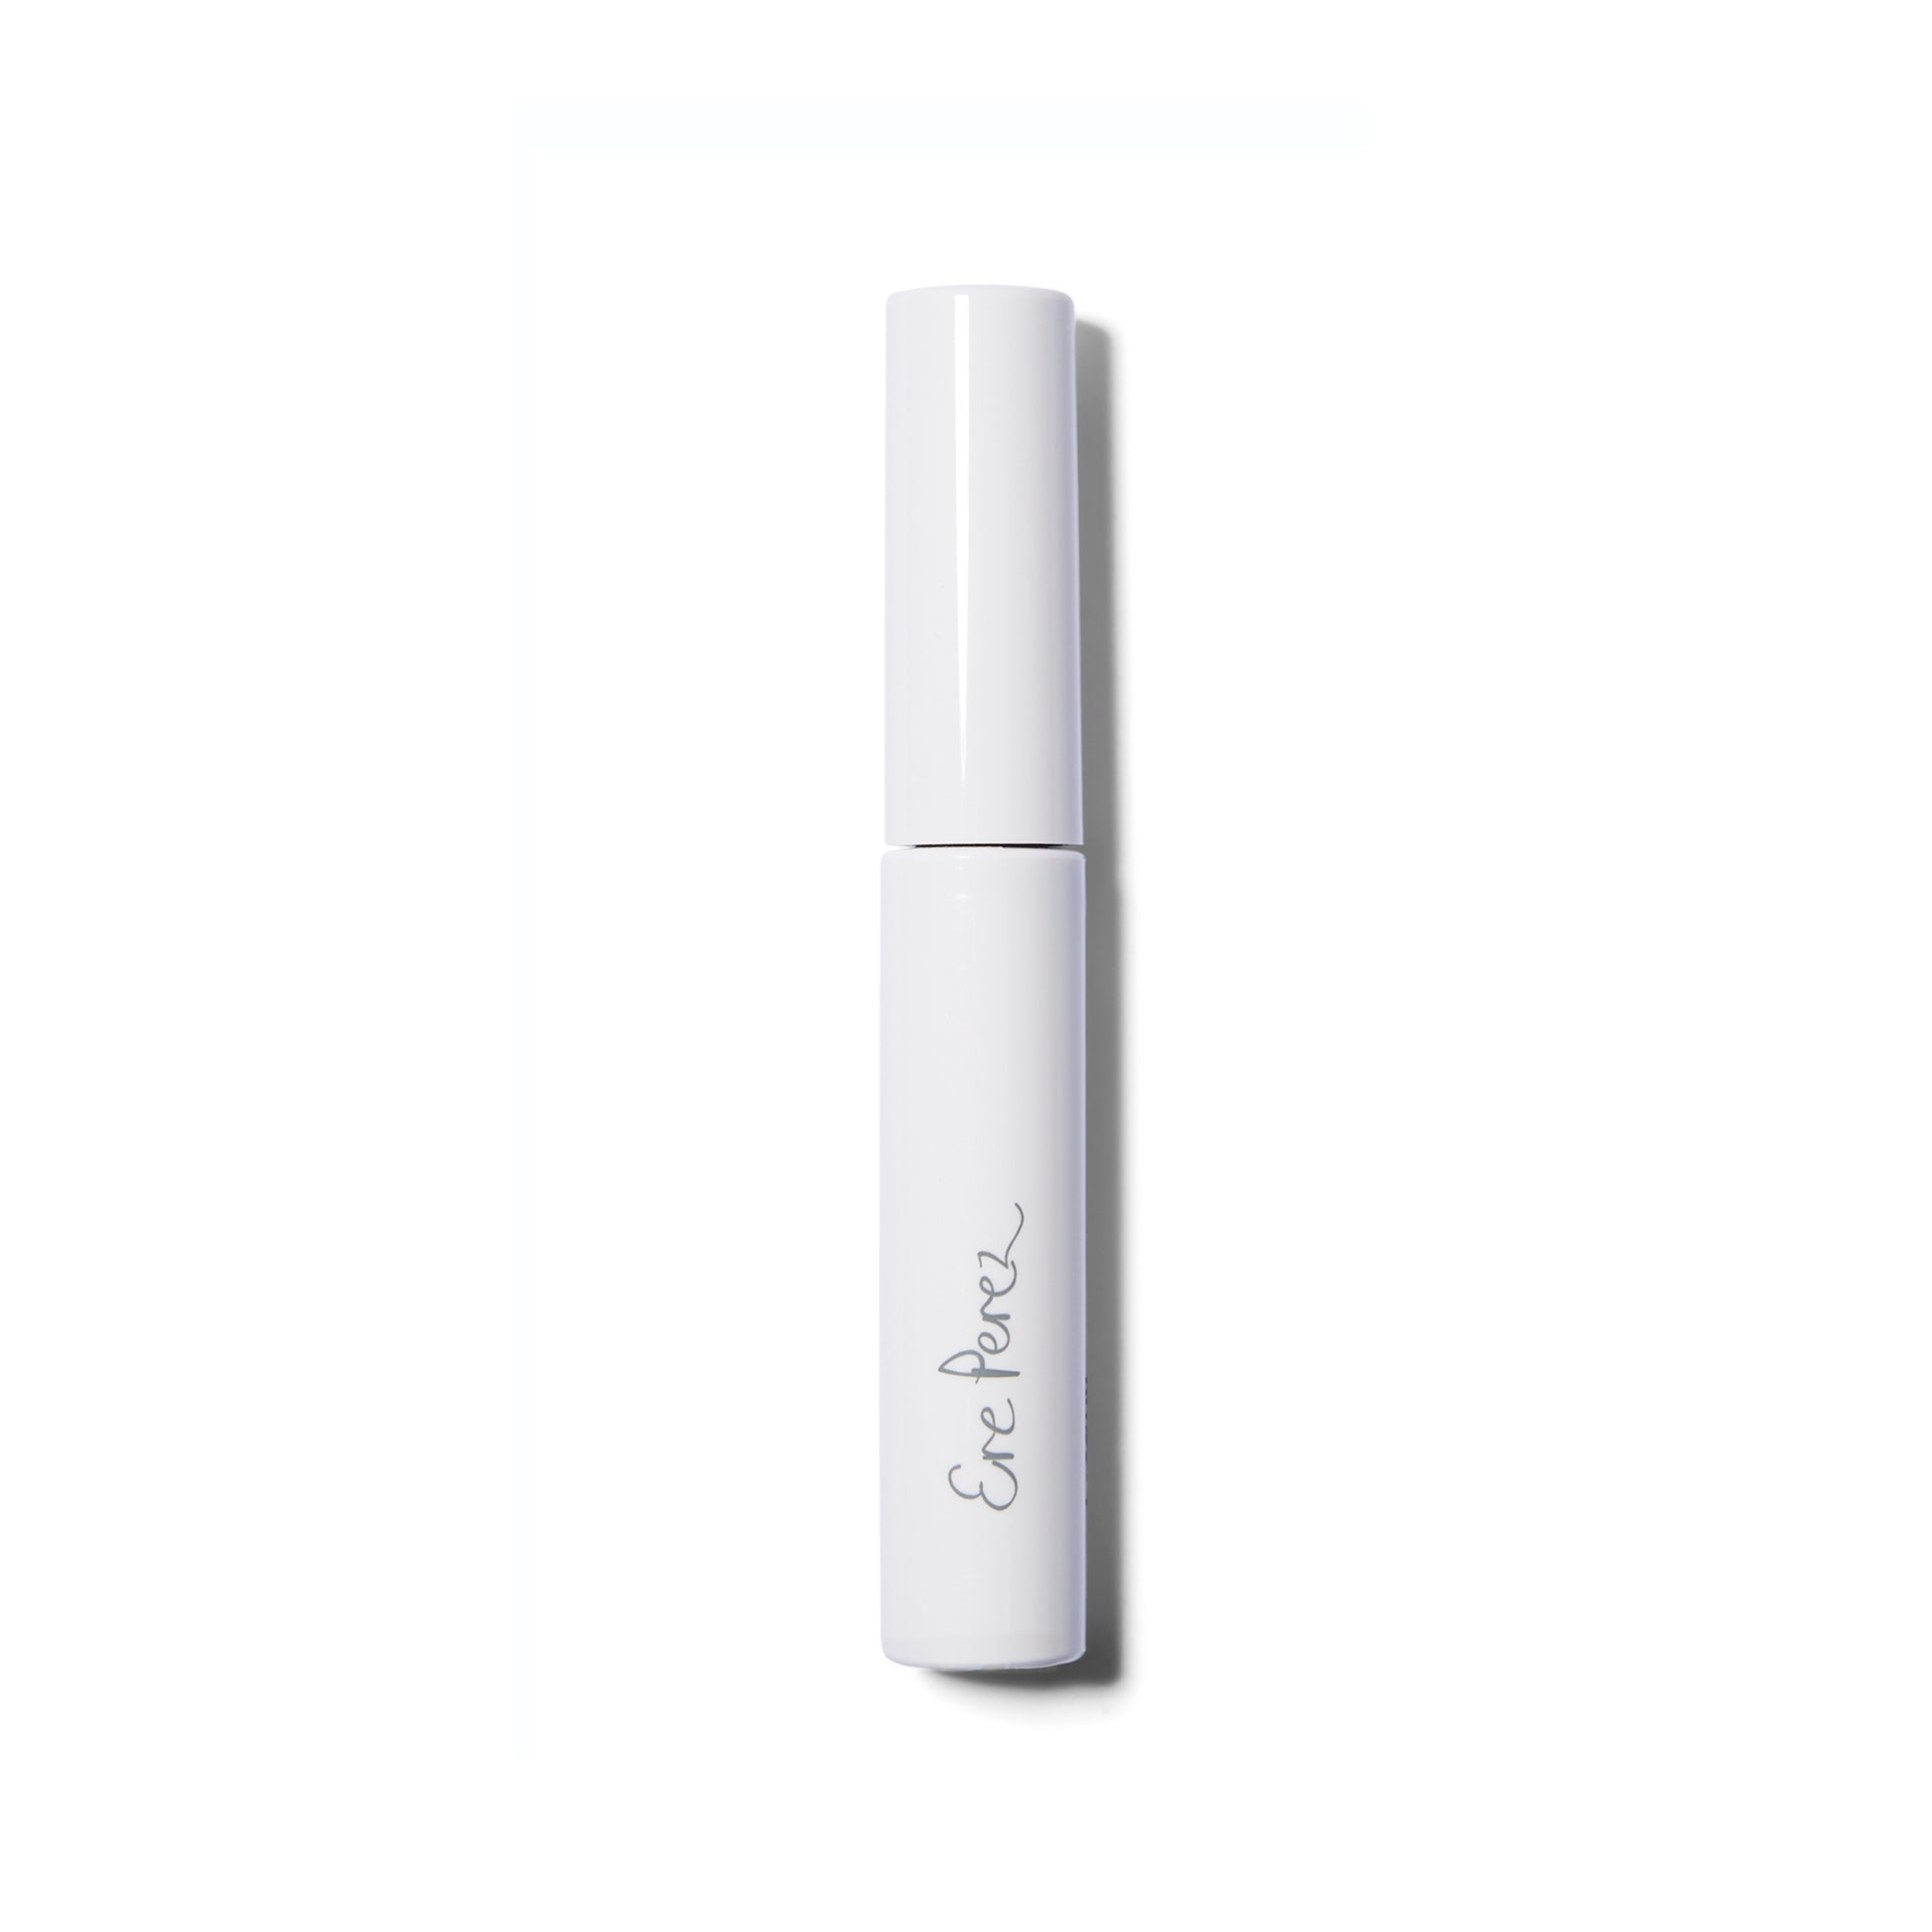 The closed tube of the Ere Perez Avocado Waterproof Mascara. The tube I white with the logo in grey.